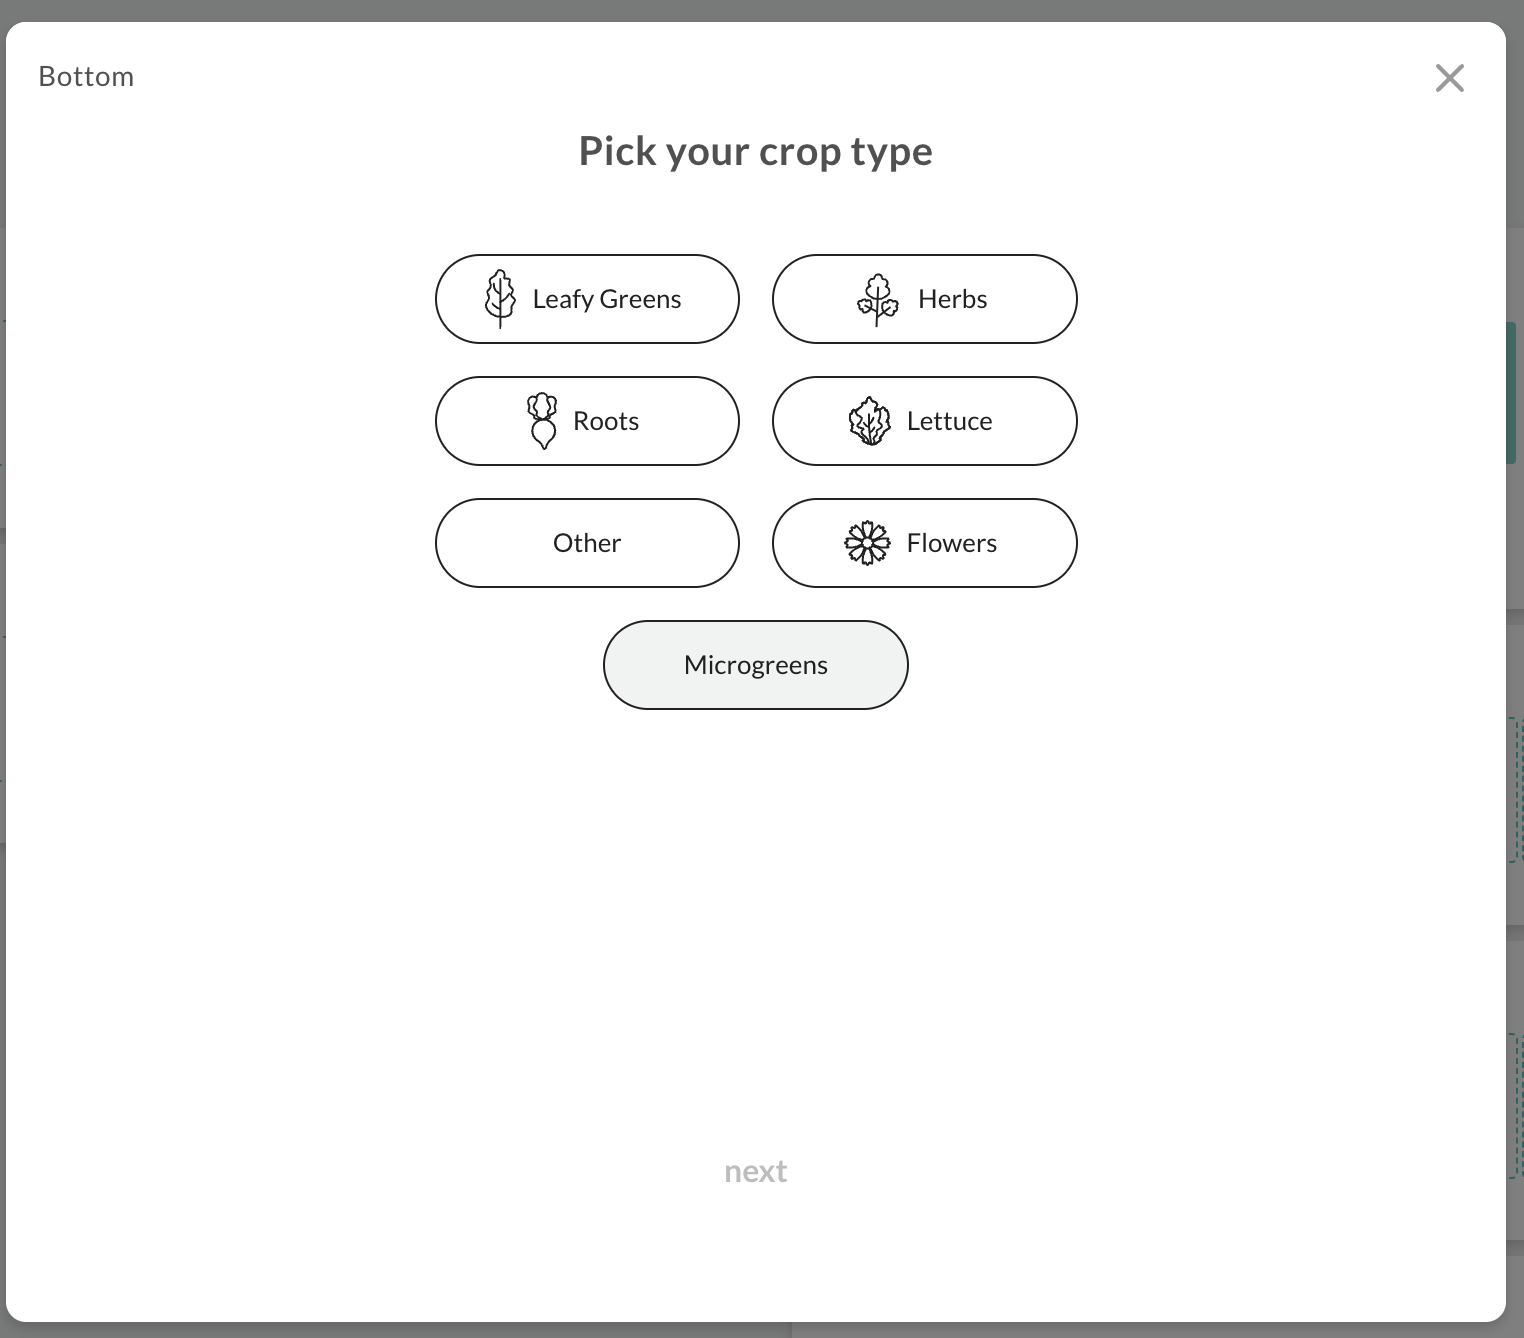 Select a crop type